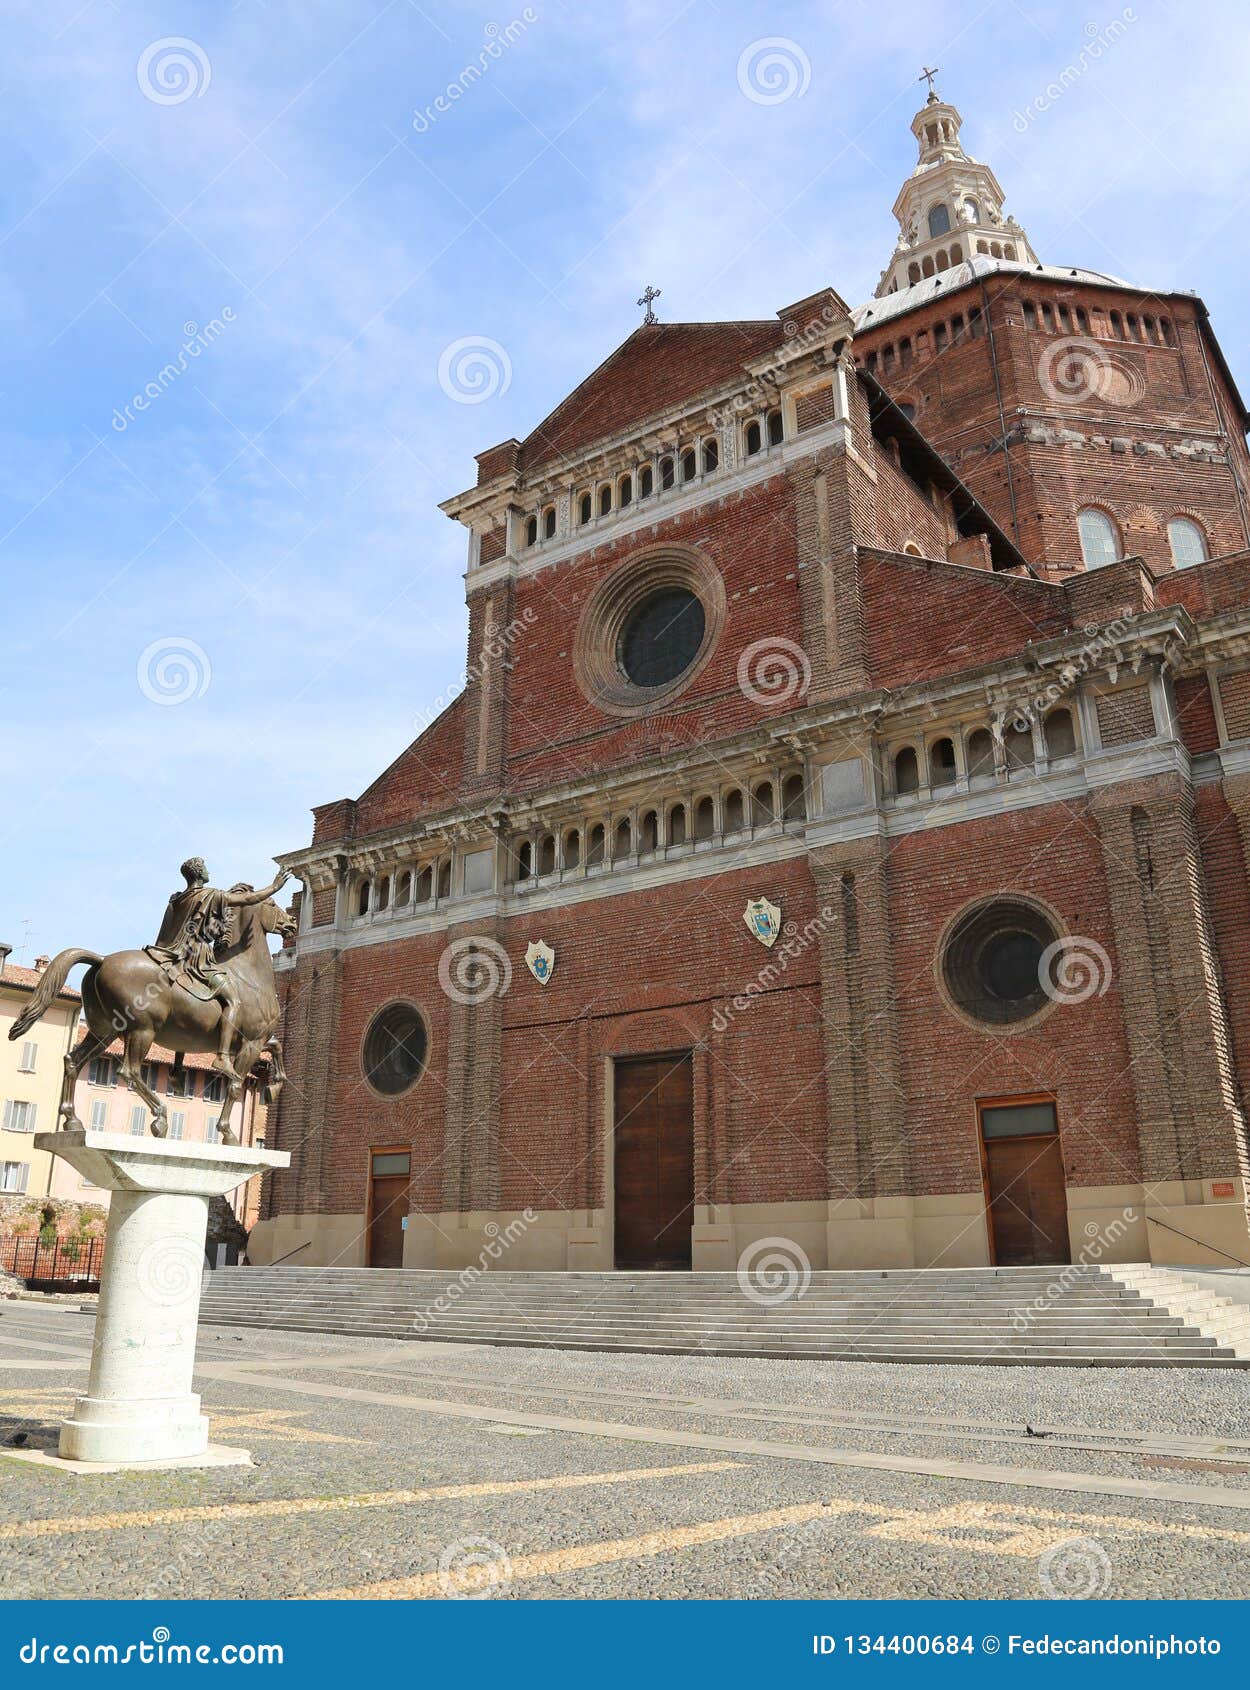 Pavia Cathedral Also Called Duomo in Italian Language Stock Photo ...